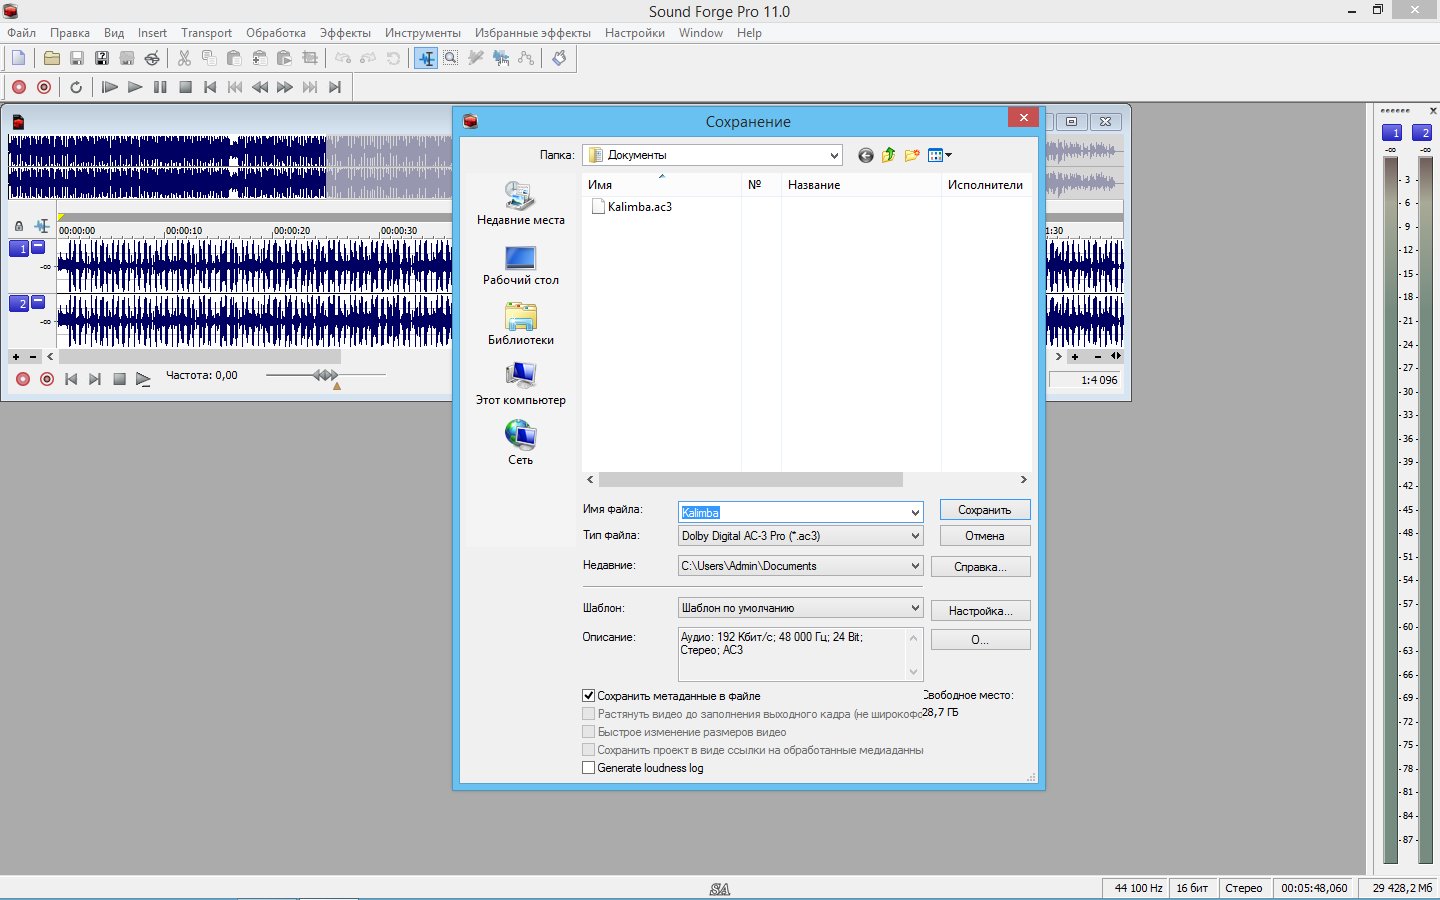 sony sound forge pro 10 torrent